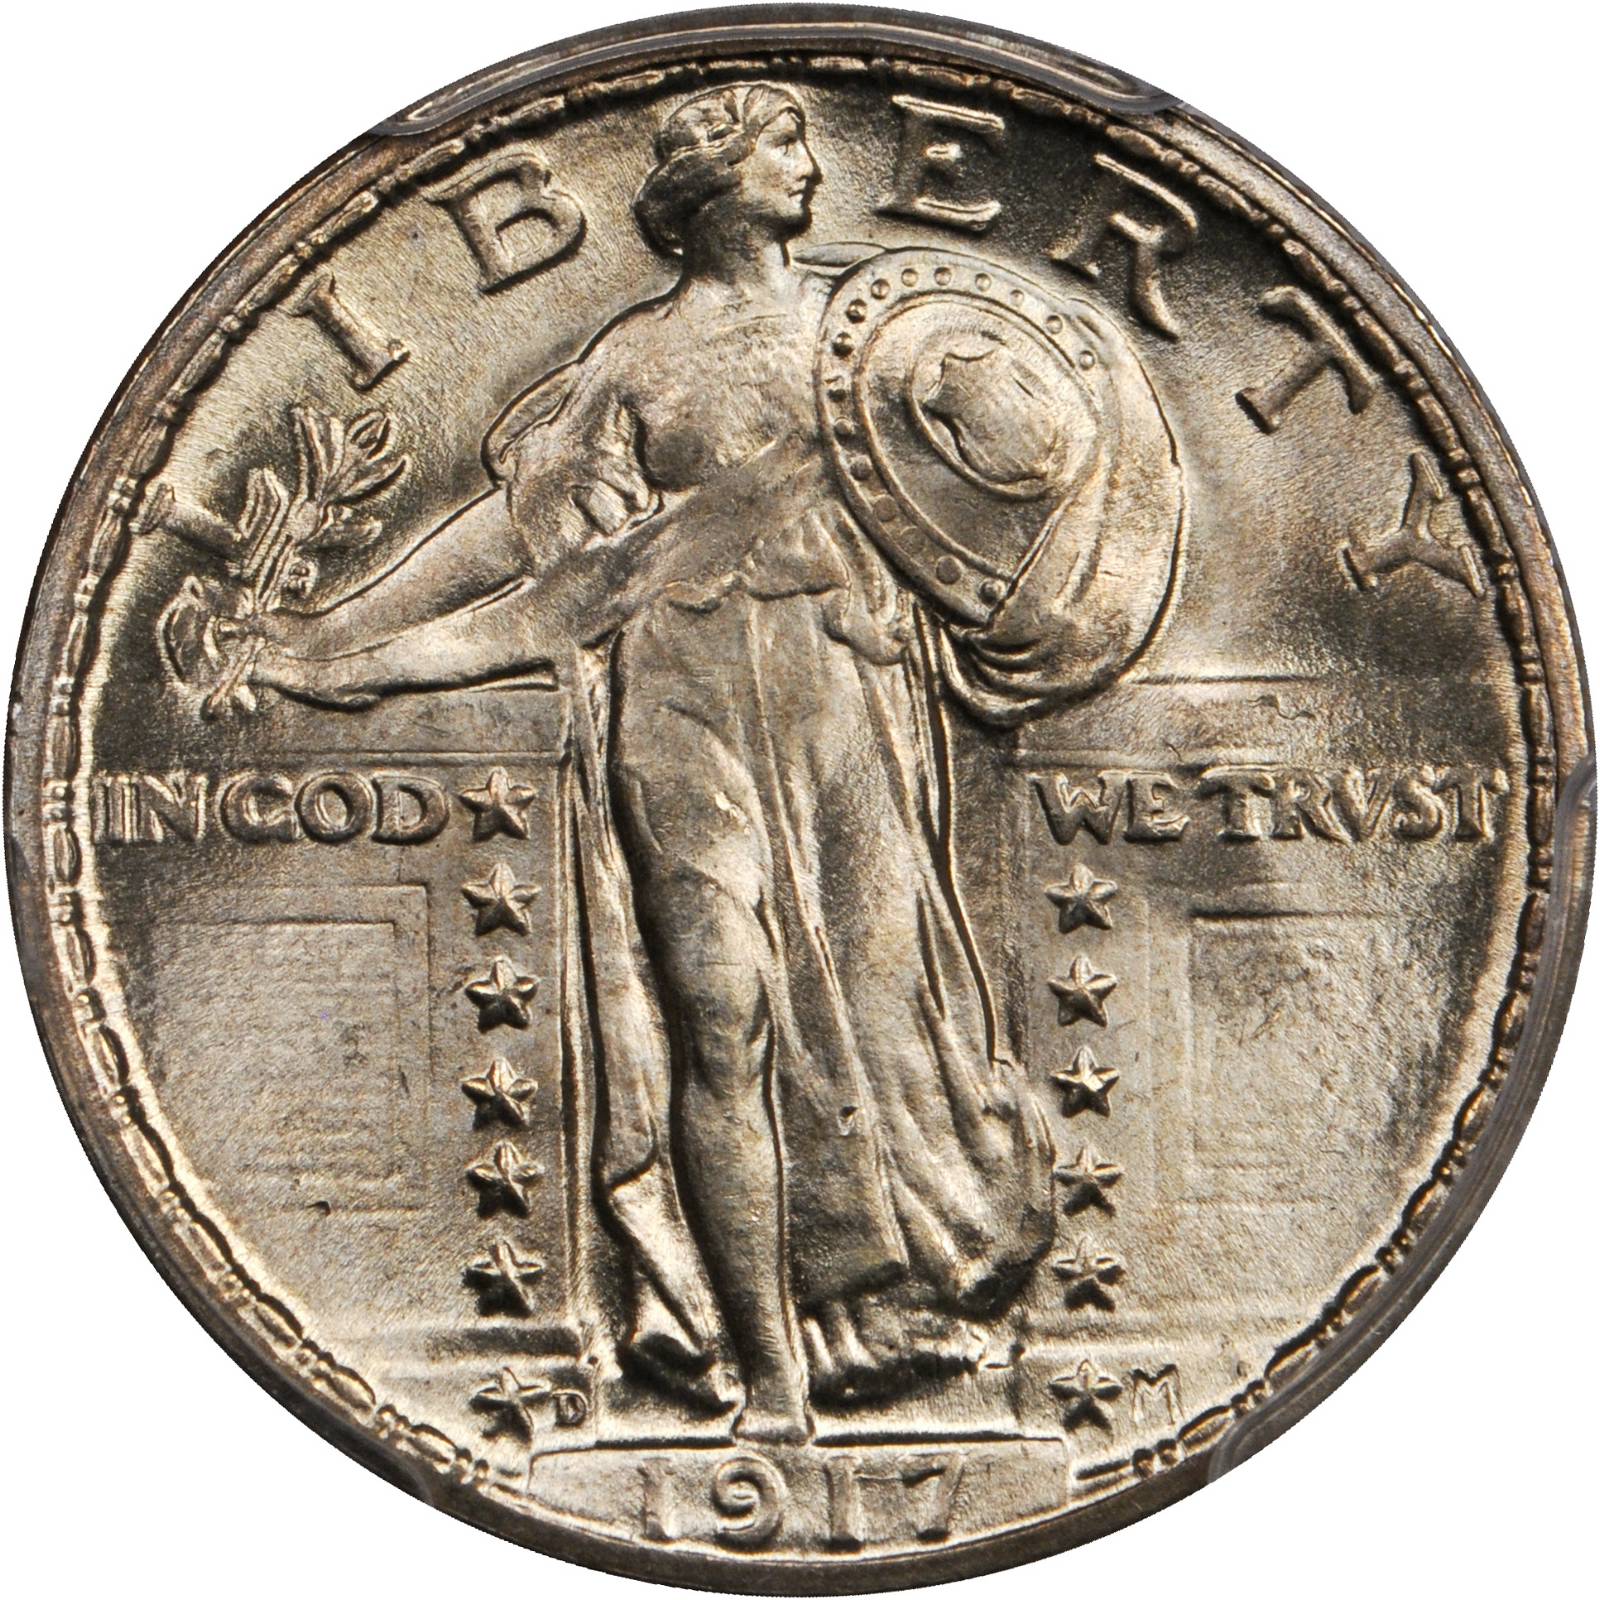 1917-D Standing Liberty Quarter. Type II. MS-68 FH (PCGS). Secure